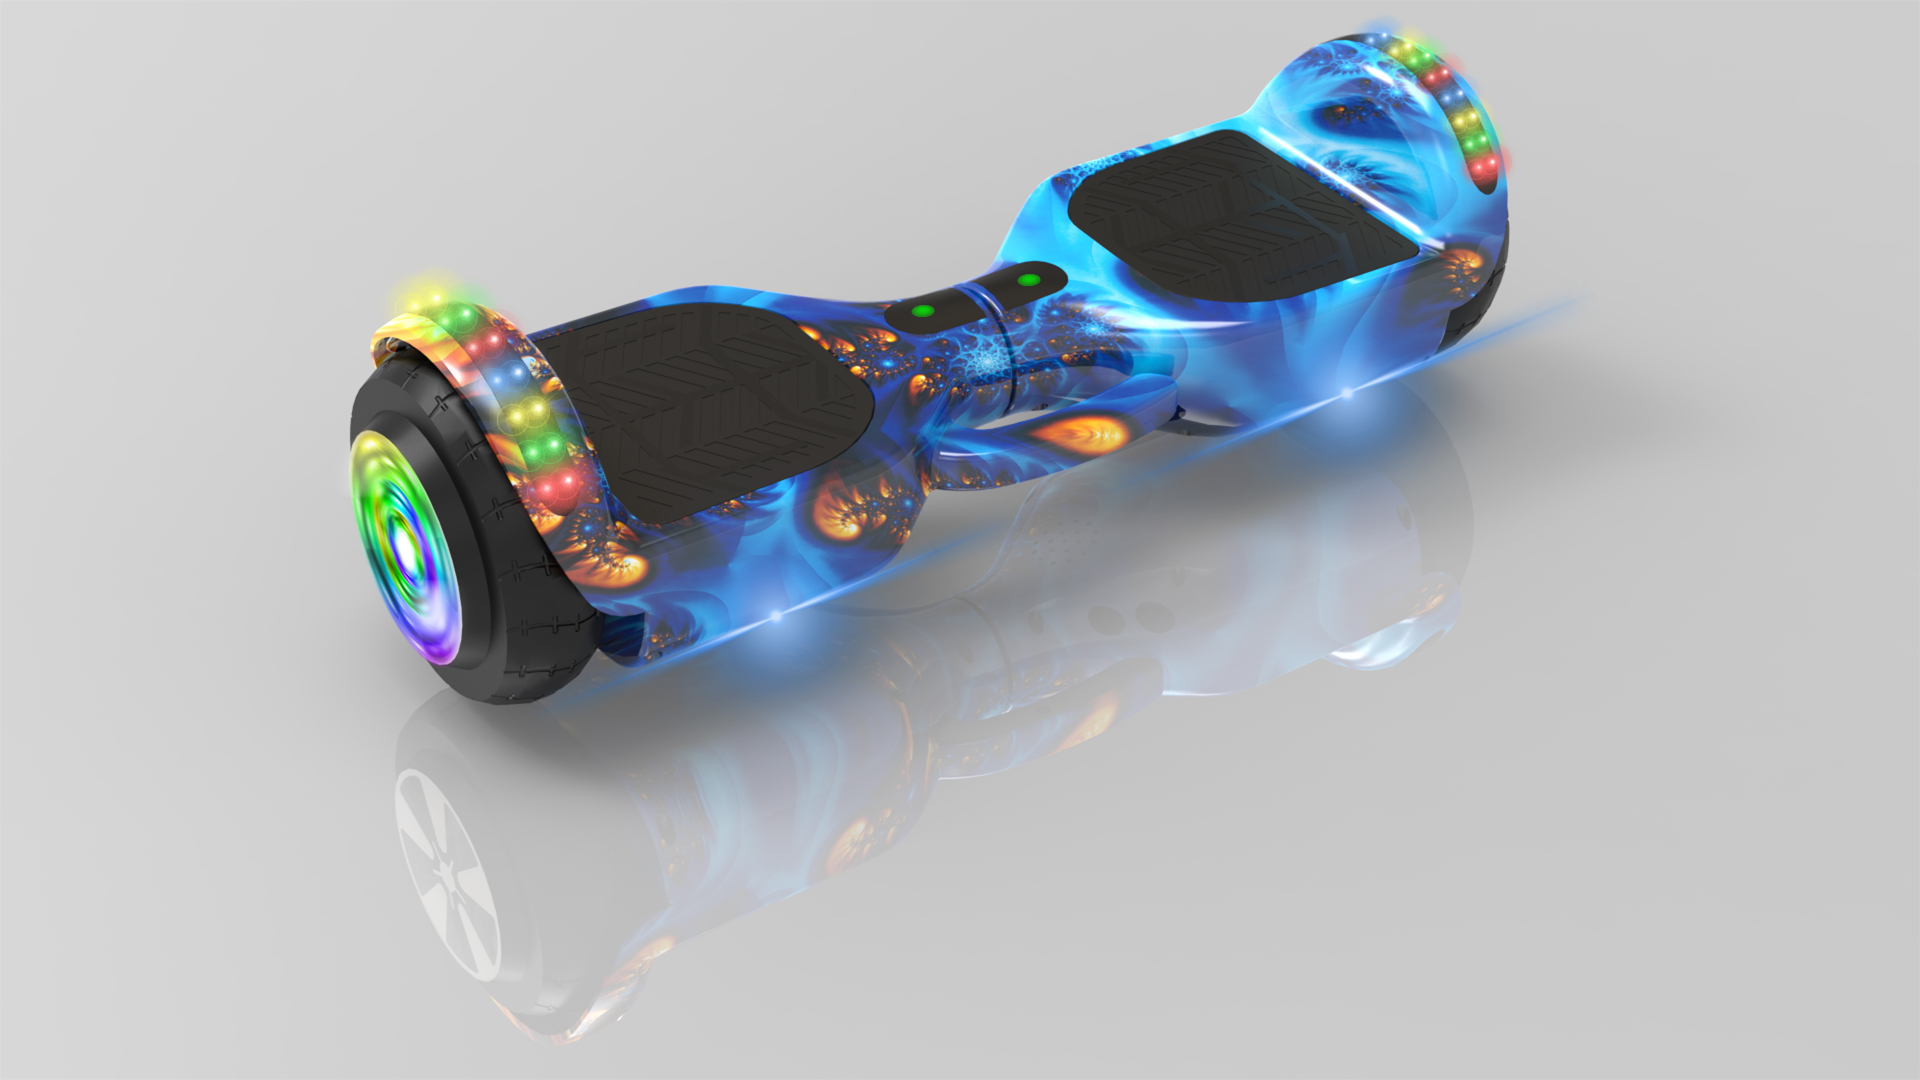 How do I choose a good hoverboard?